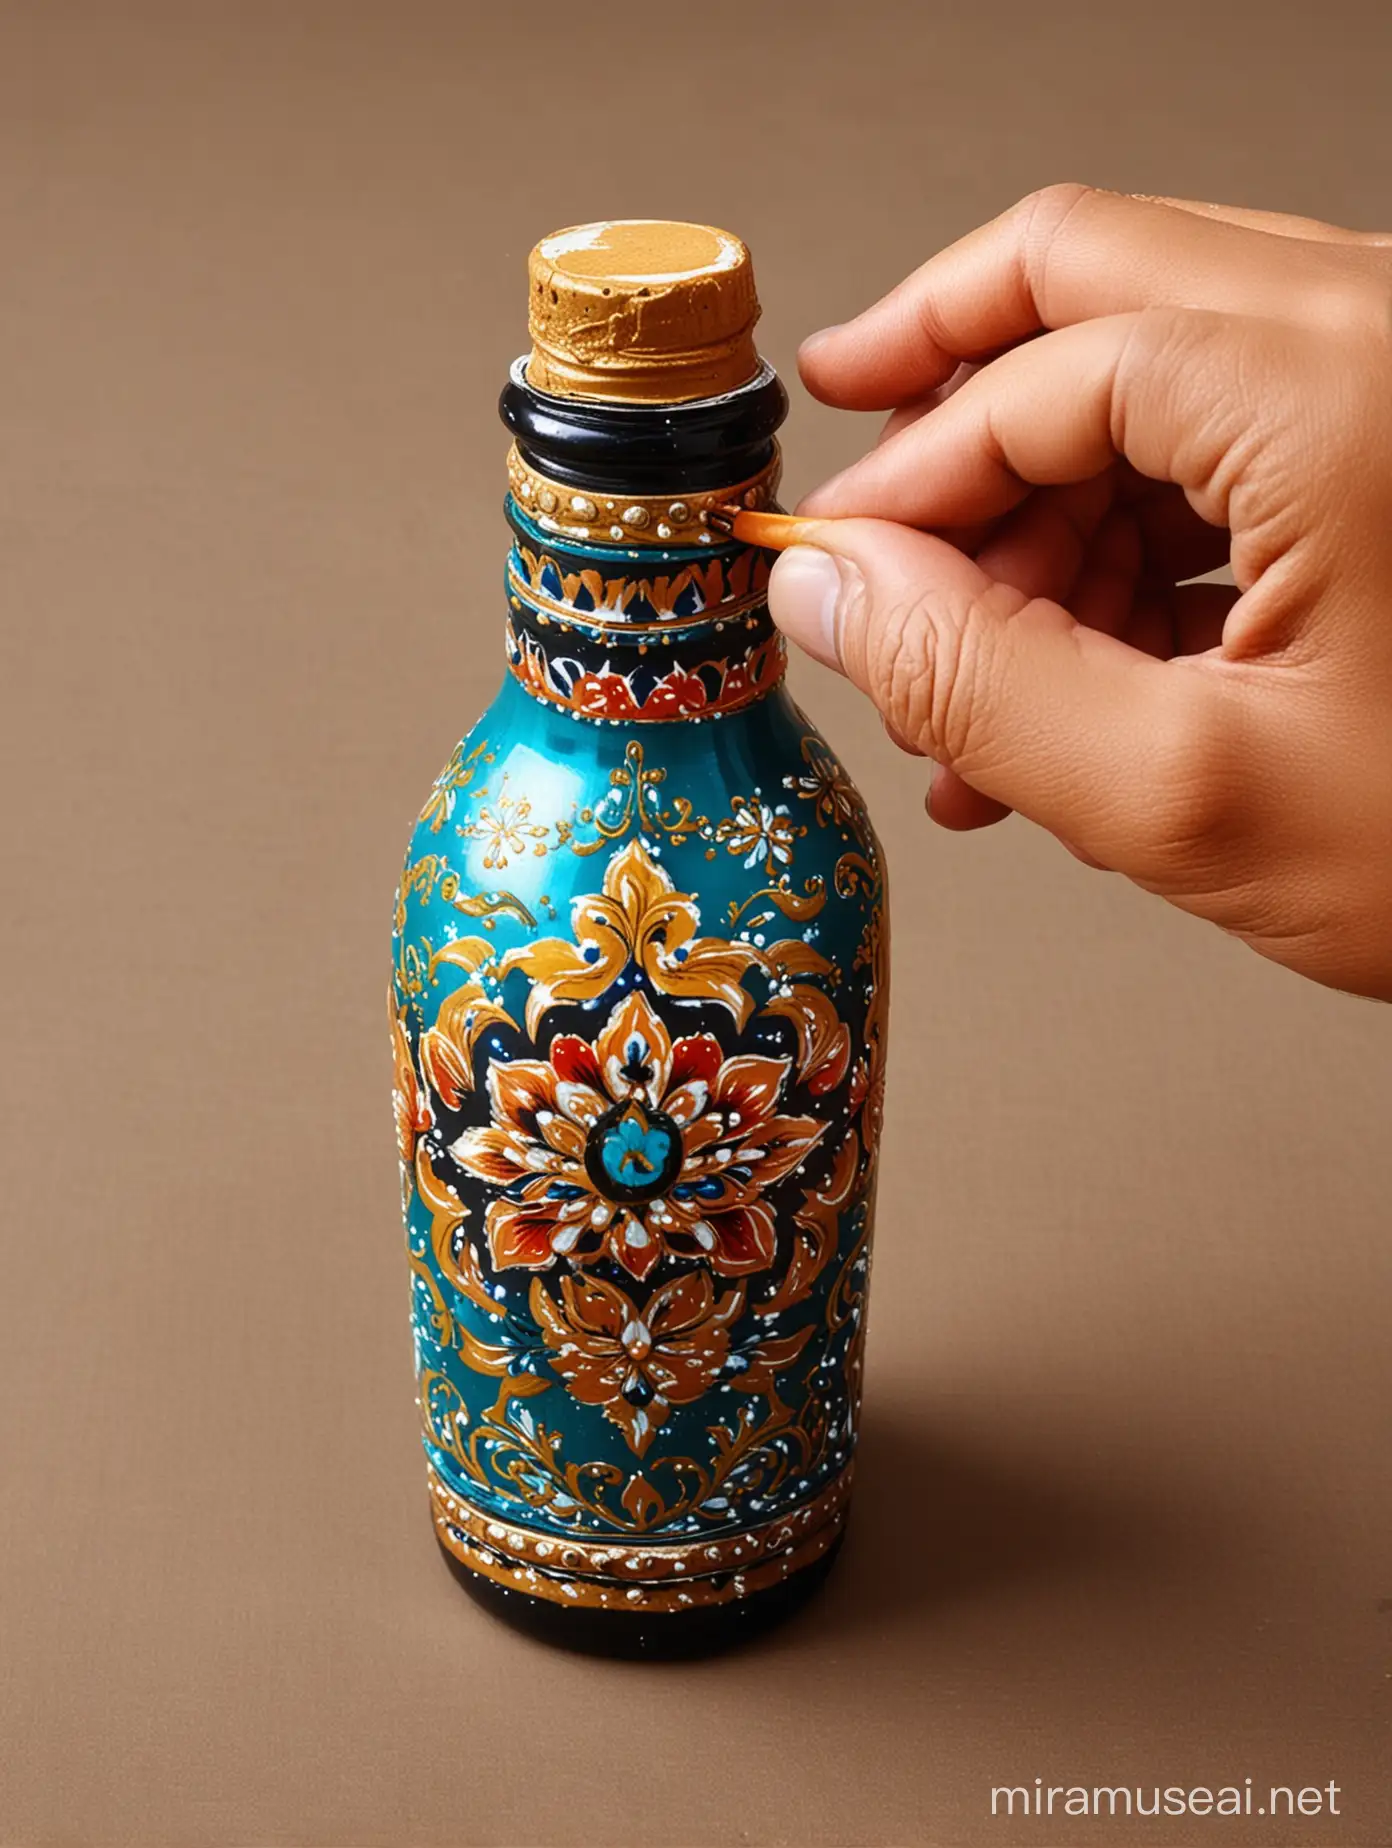 A hand painting a Mughal design on a bottle  using acrylic paints